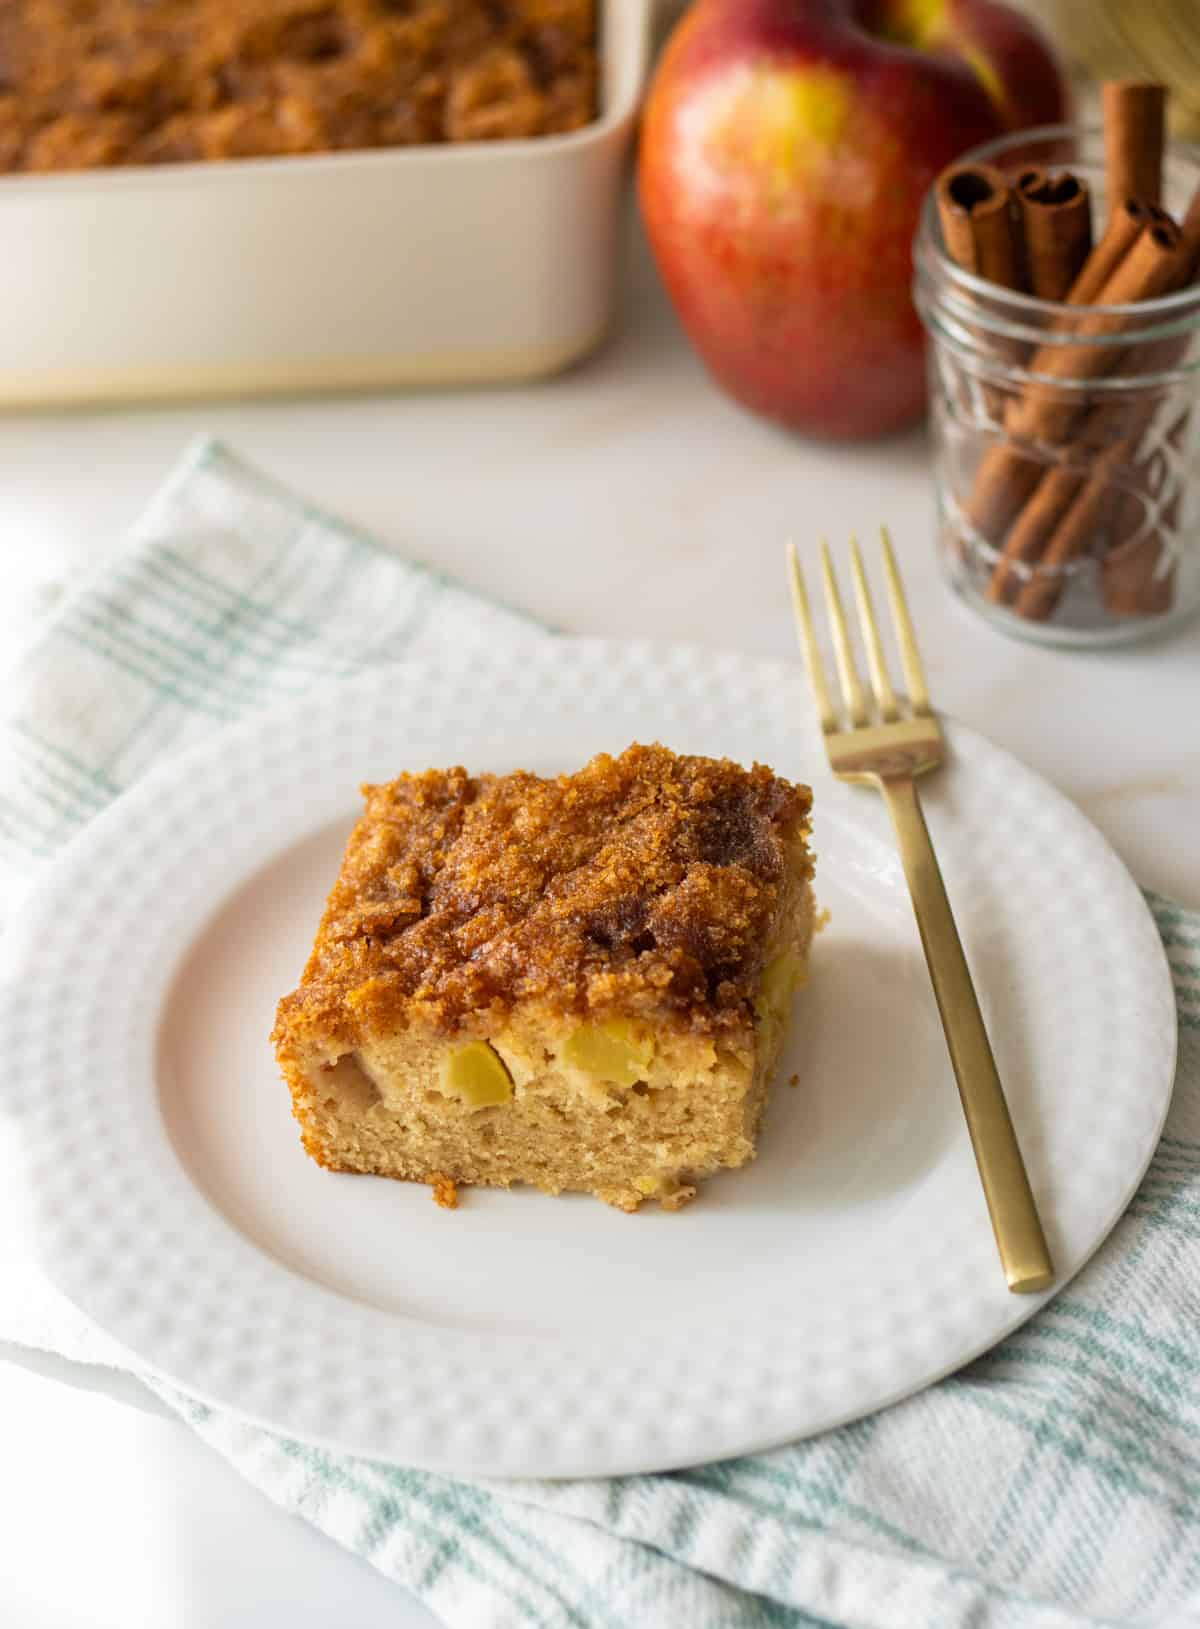 Slice of cinnamon apple cake on a plate with a fork on top of a towel.